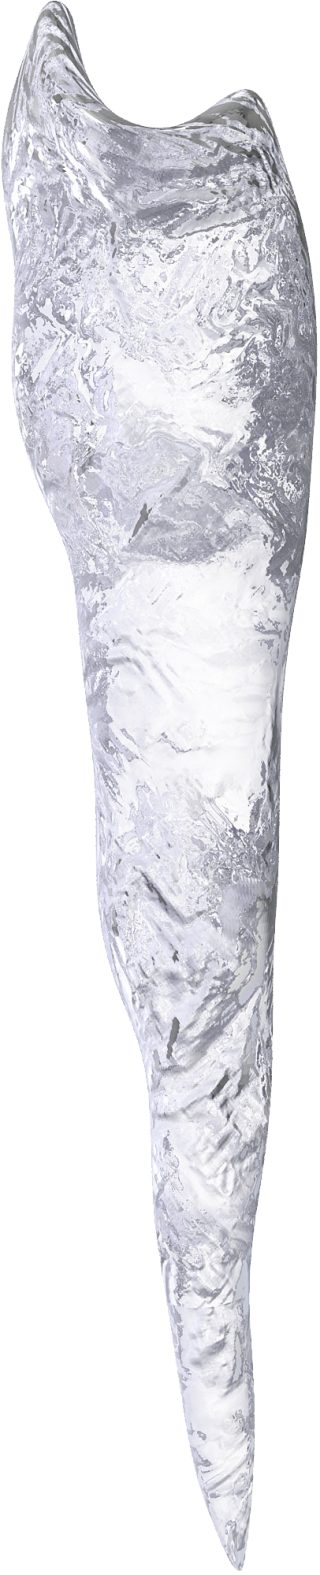 Foreign-looking Natural Thick Icicle Photo PNG images